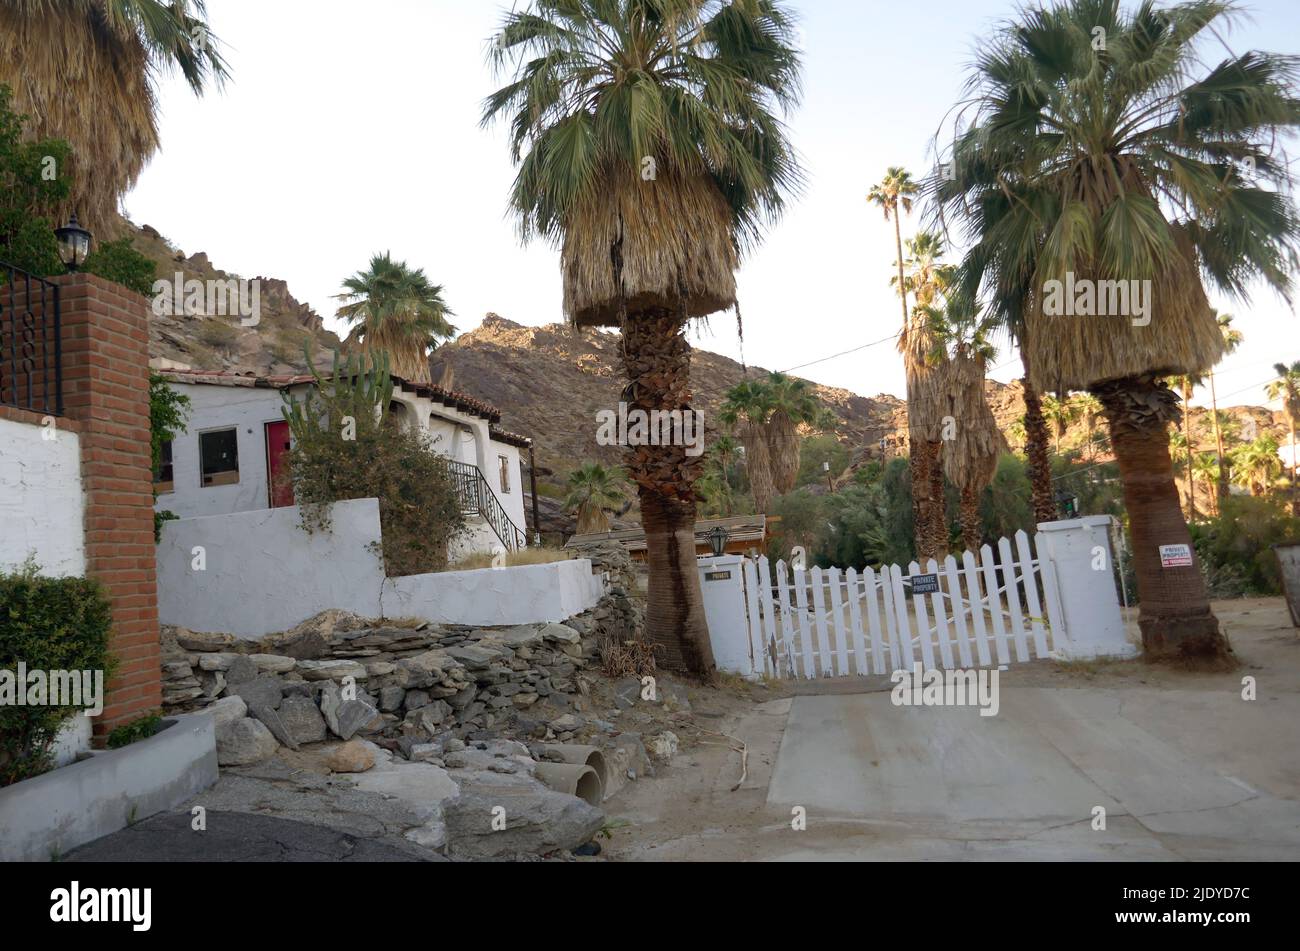 Palm Springs, California, USA 11th June 2022 A general view of atmosphere of Actress Suzanne Somers Former Home on June 11, 2022 in Palm Springs, California, USA. Photo by Barry King/Alamy Stock Photo Stock Photo